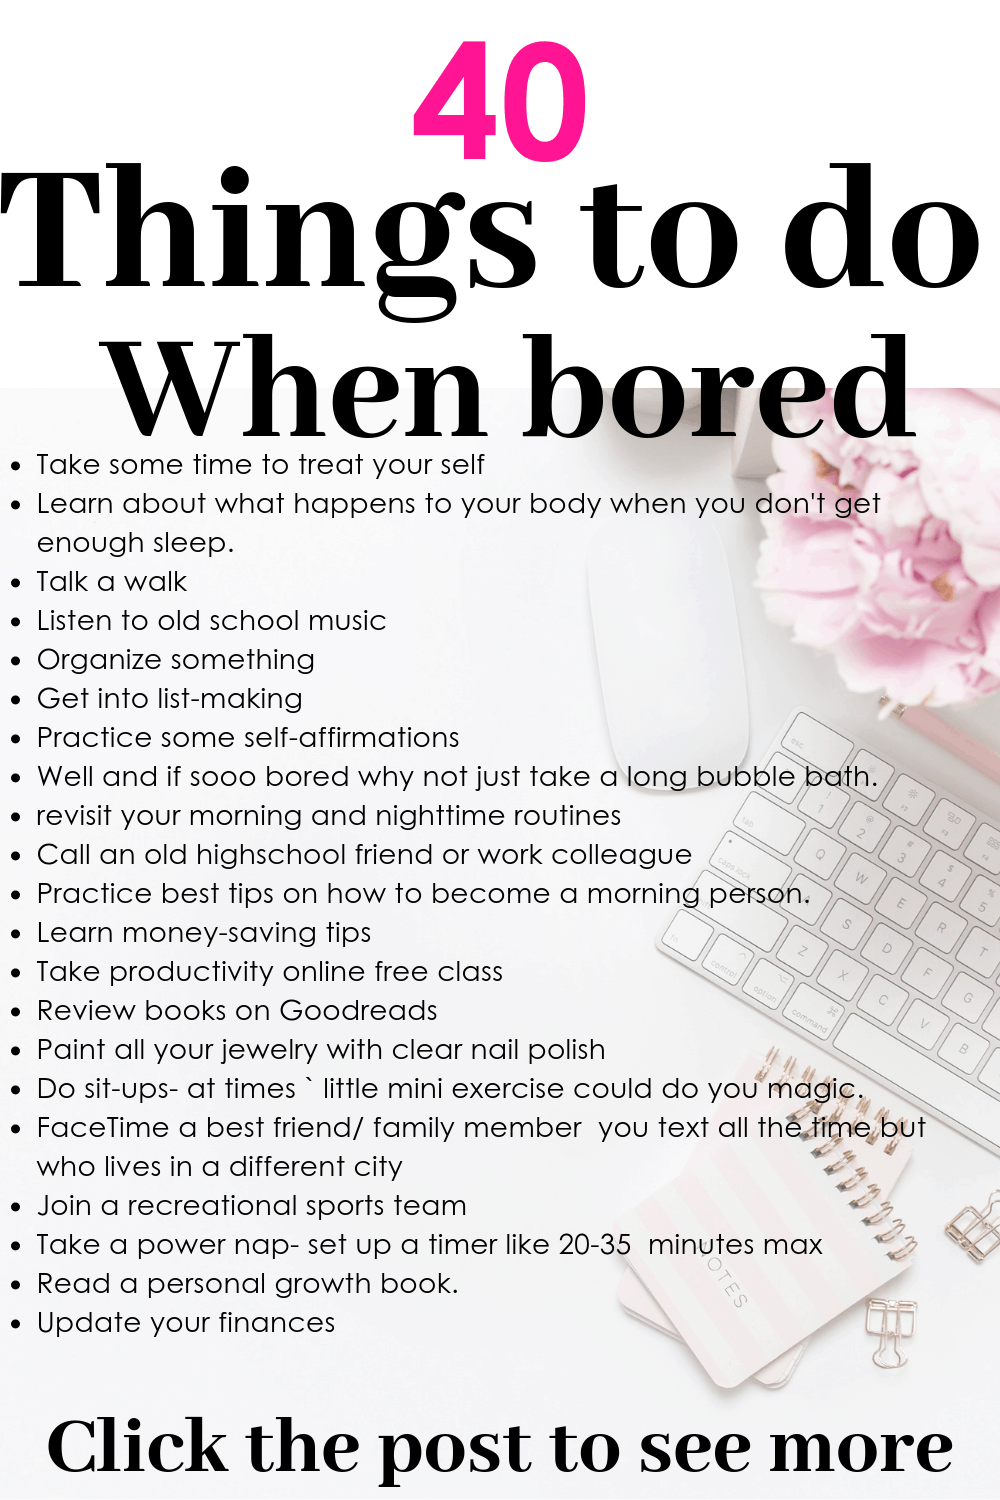 Wondering what fun, creative adult activities or things to do when bored either at home alone, at work or with a friend? This article has over 30 creative bored ideas solution for adults activities that you kill your boredom. Number 16 & 24 are my top best. Click to read the rest. #bored #girlboss #babe #beauty #goals #happy #queen #atwork #bored #alone #idle #beauty#makeup #selflove #selfcare #goals